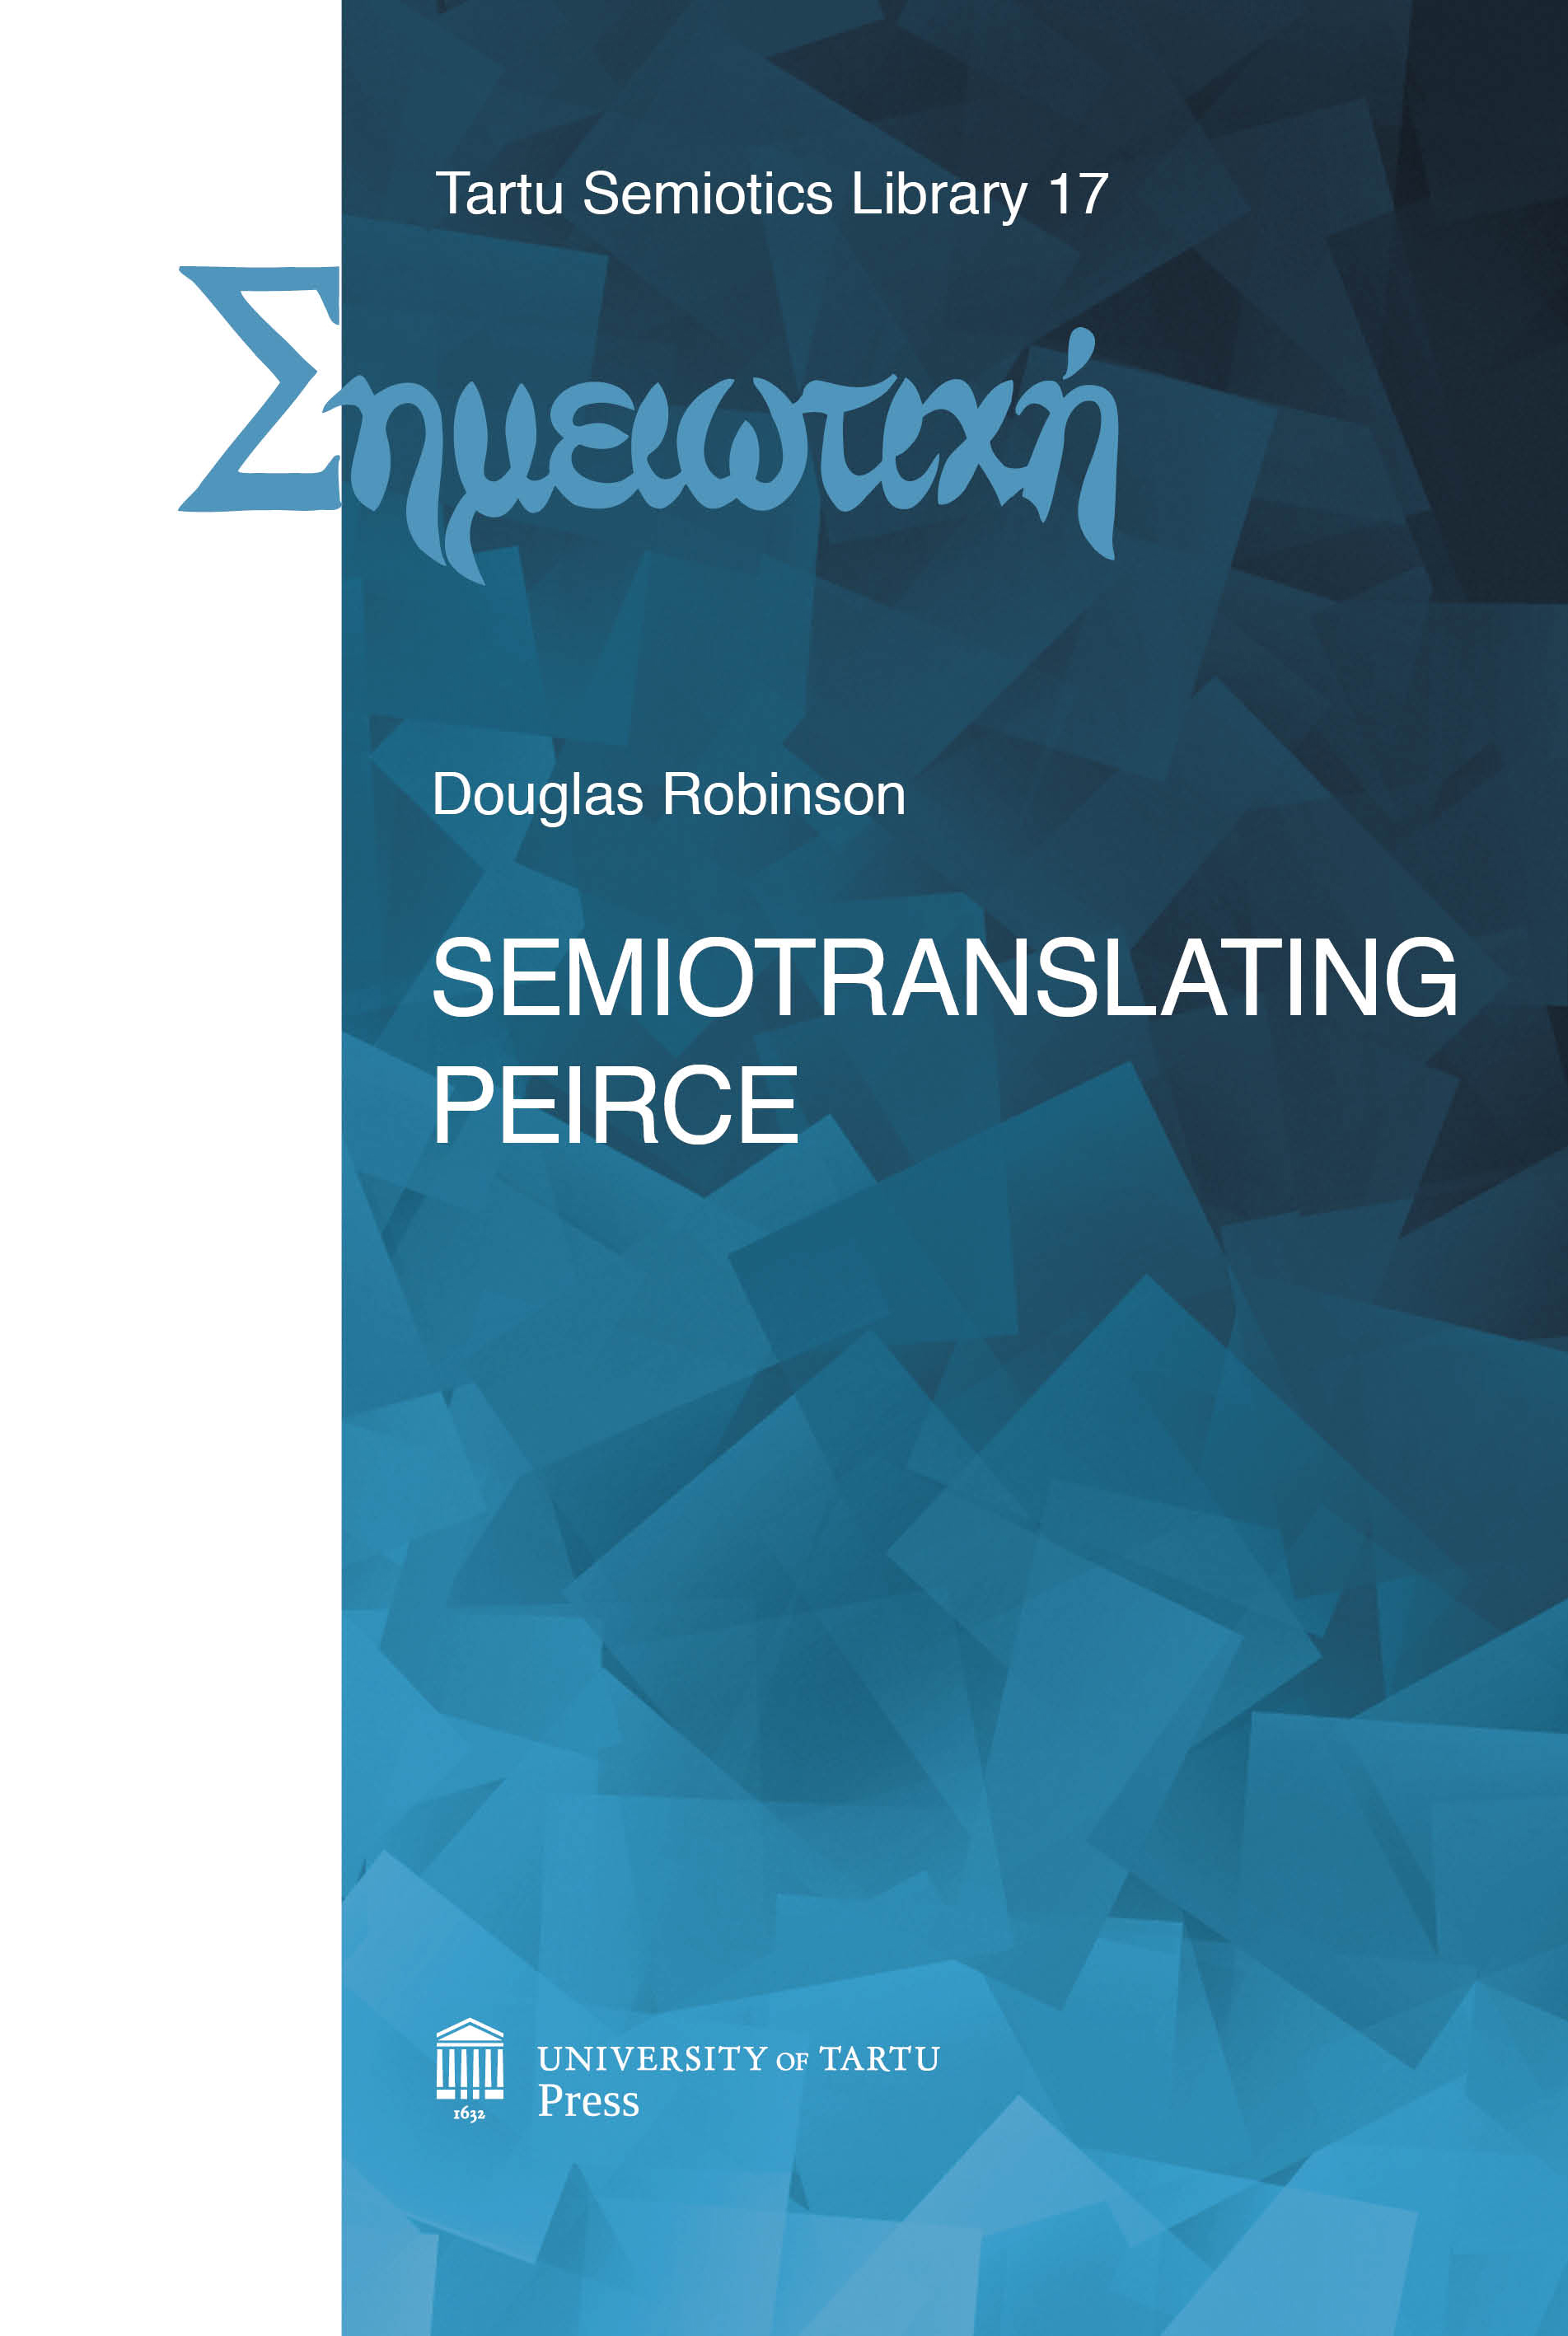 Chapter 3. - Test case 2: Semiotranslating “Prufrock” into Finnish Cover Image